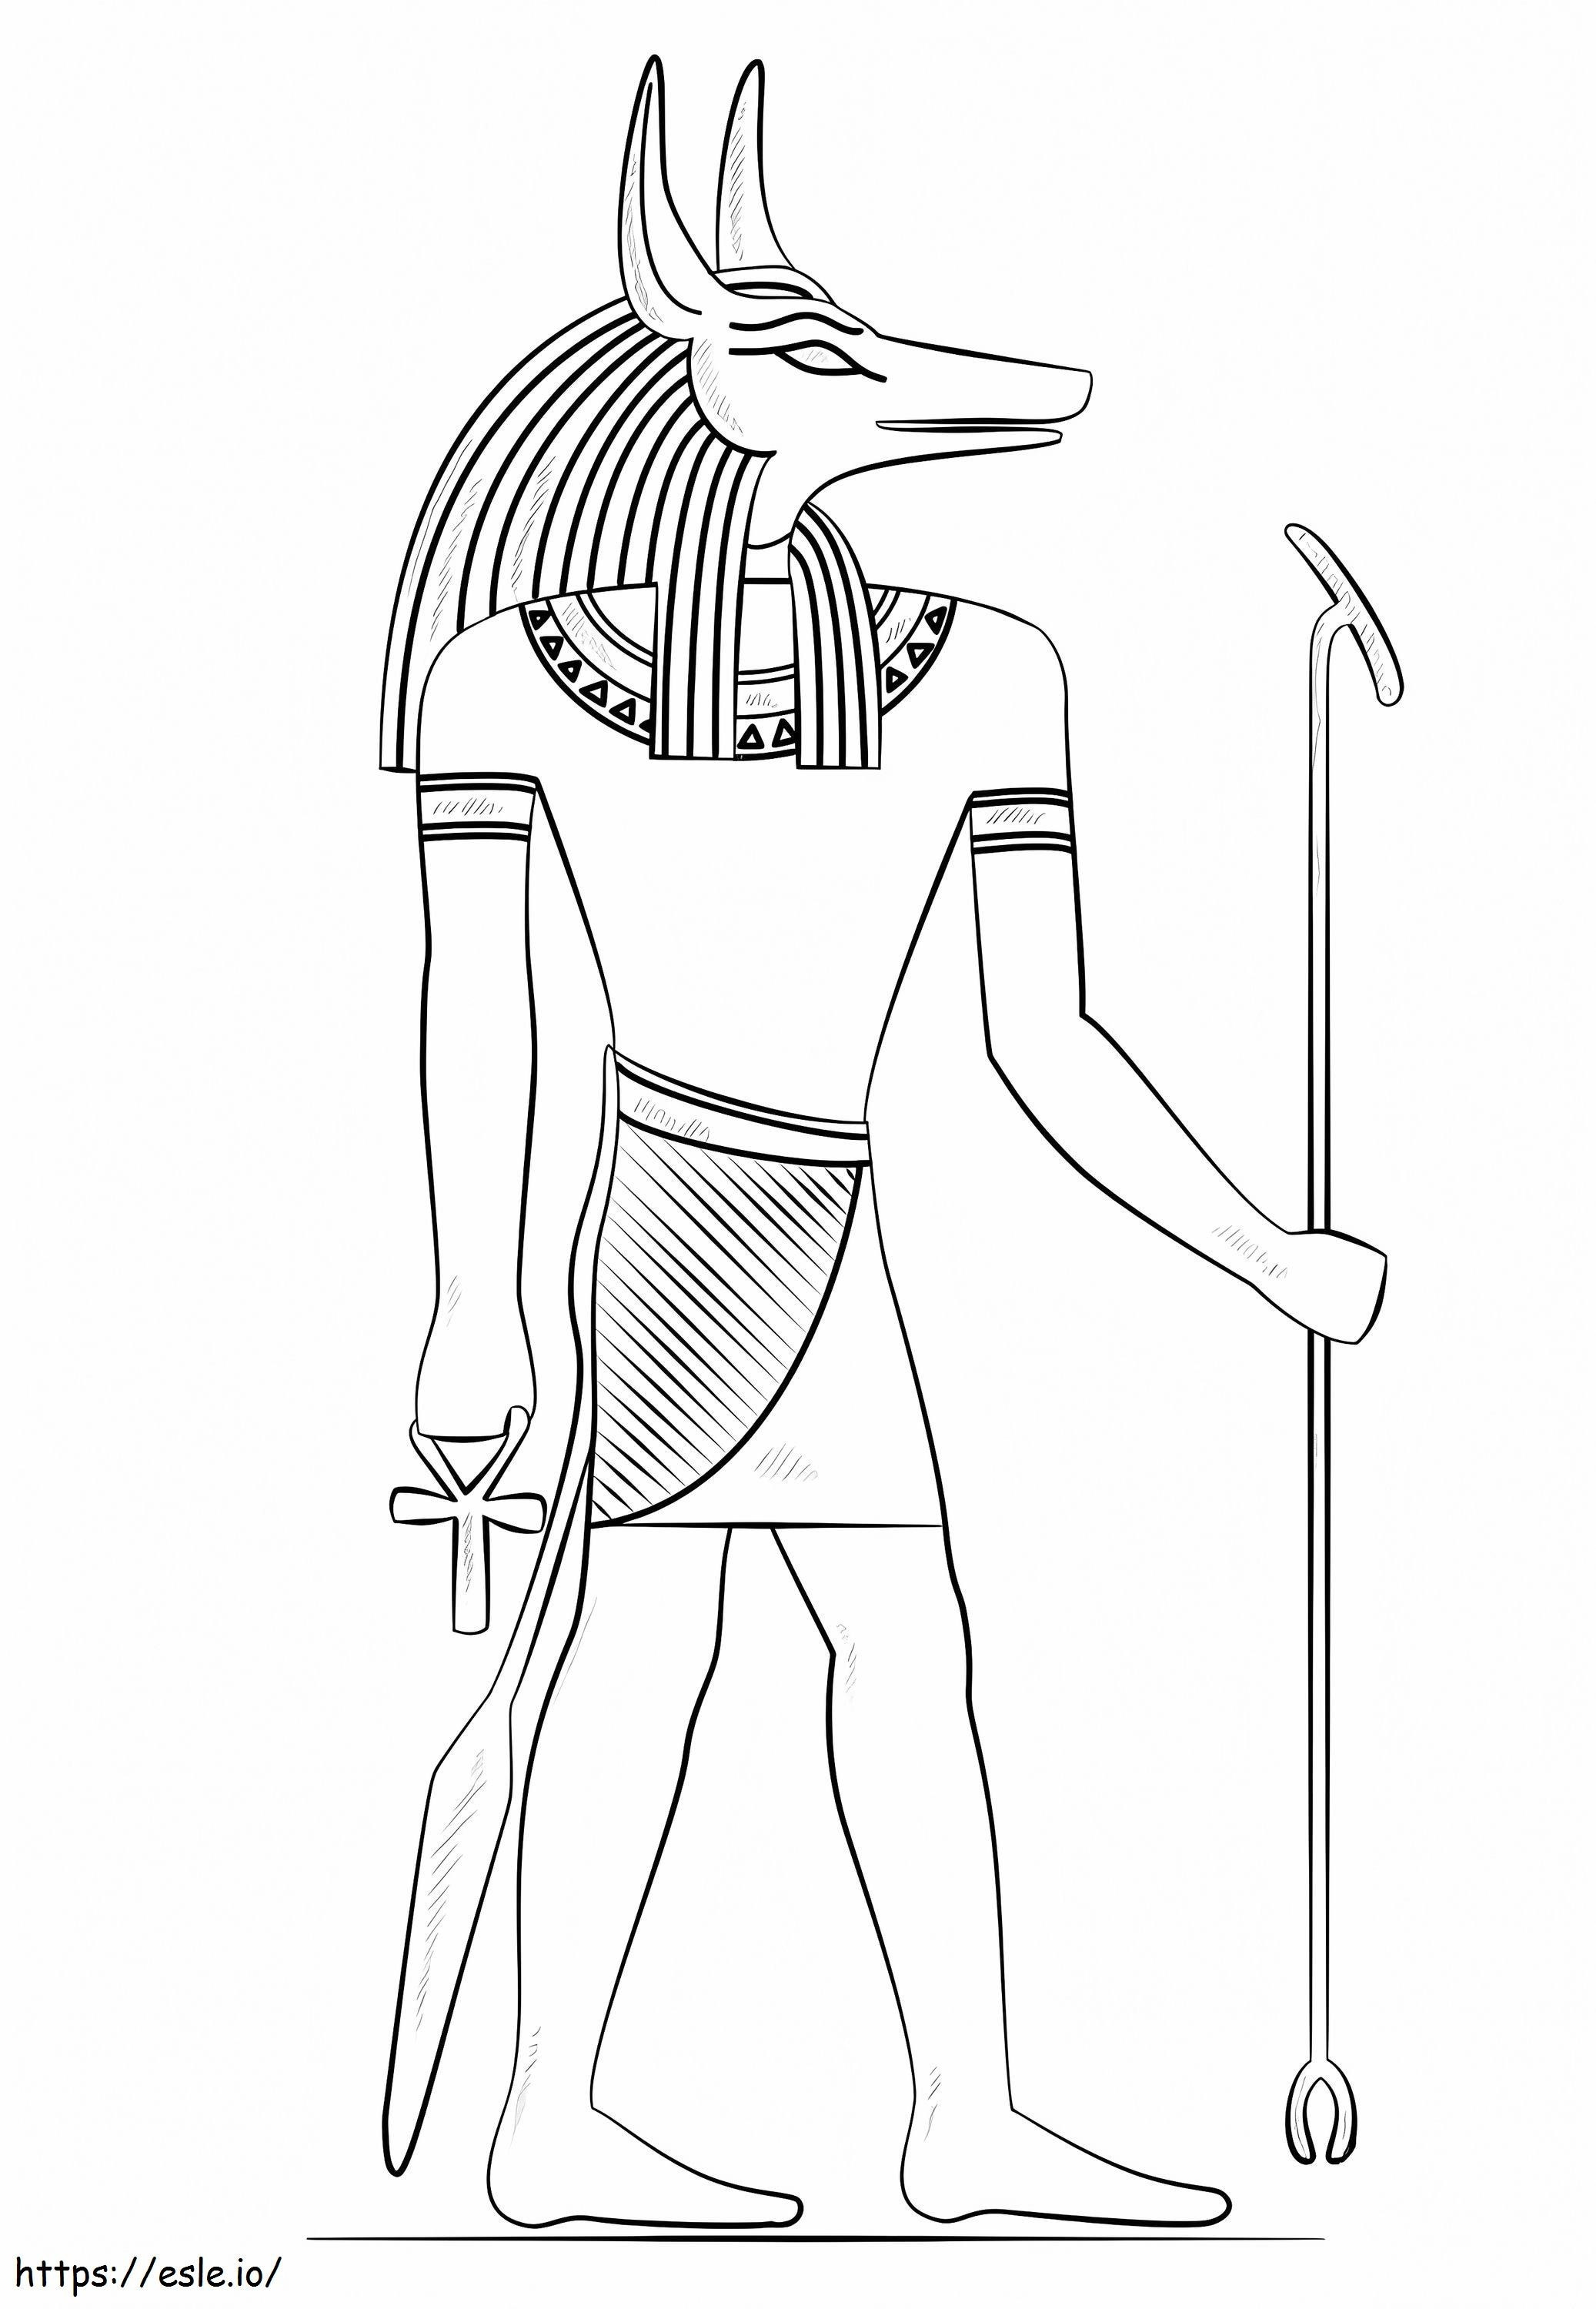 Anubis The God Of Death coloring page